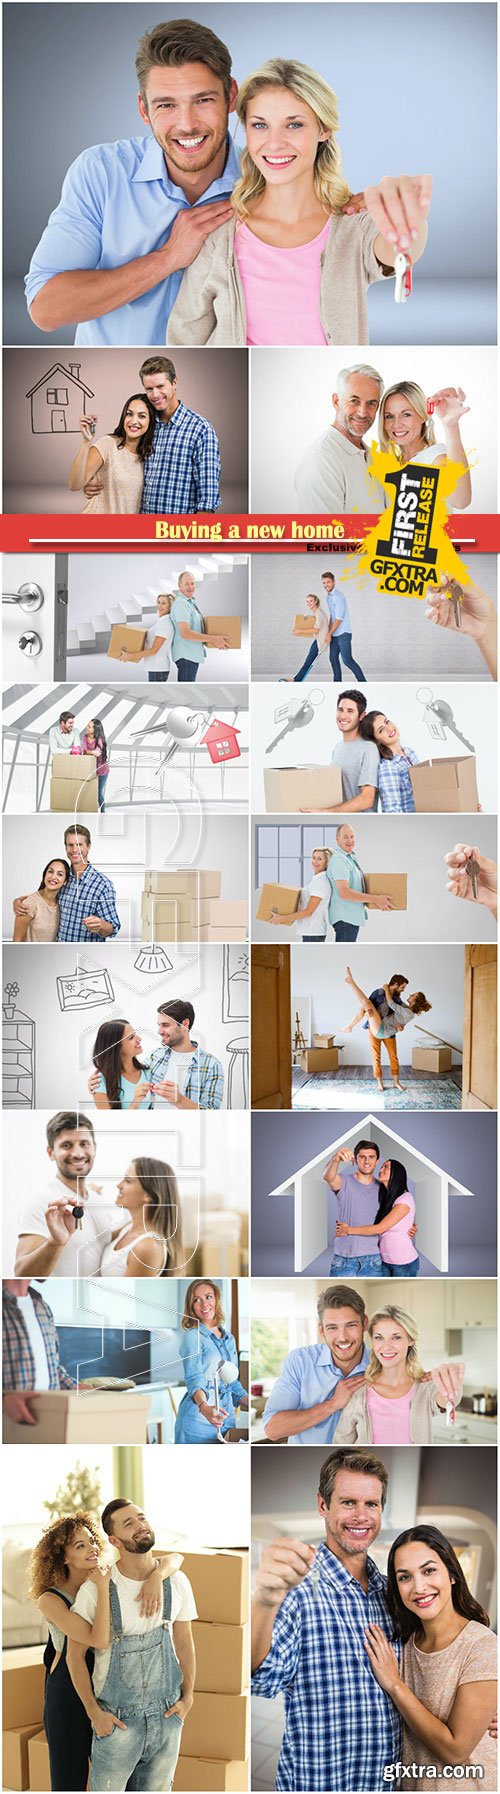 Buying a new home, couples unpacking boxes in a new house